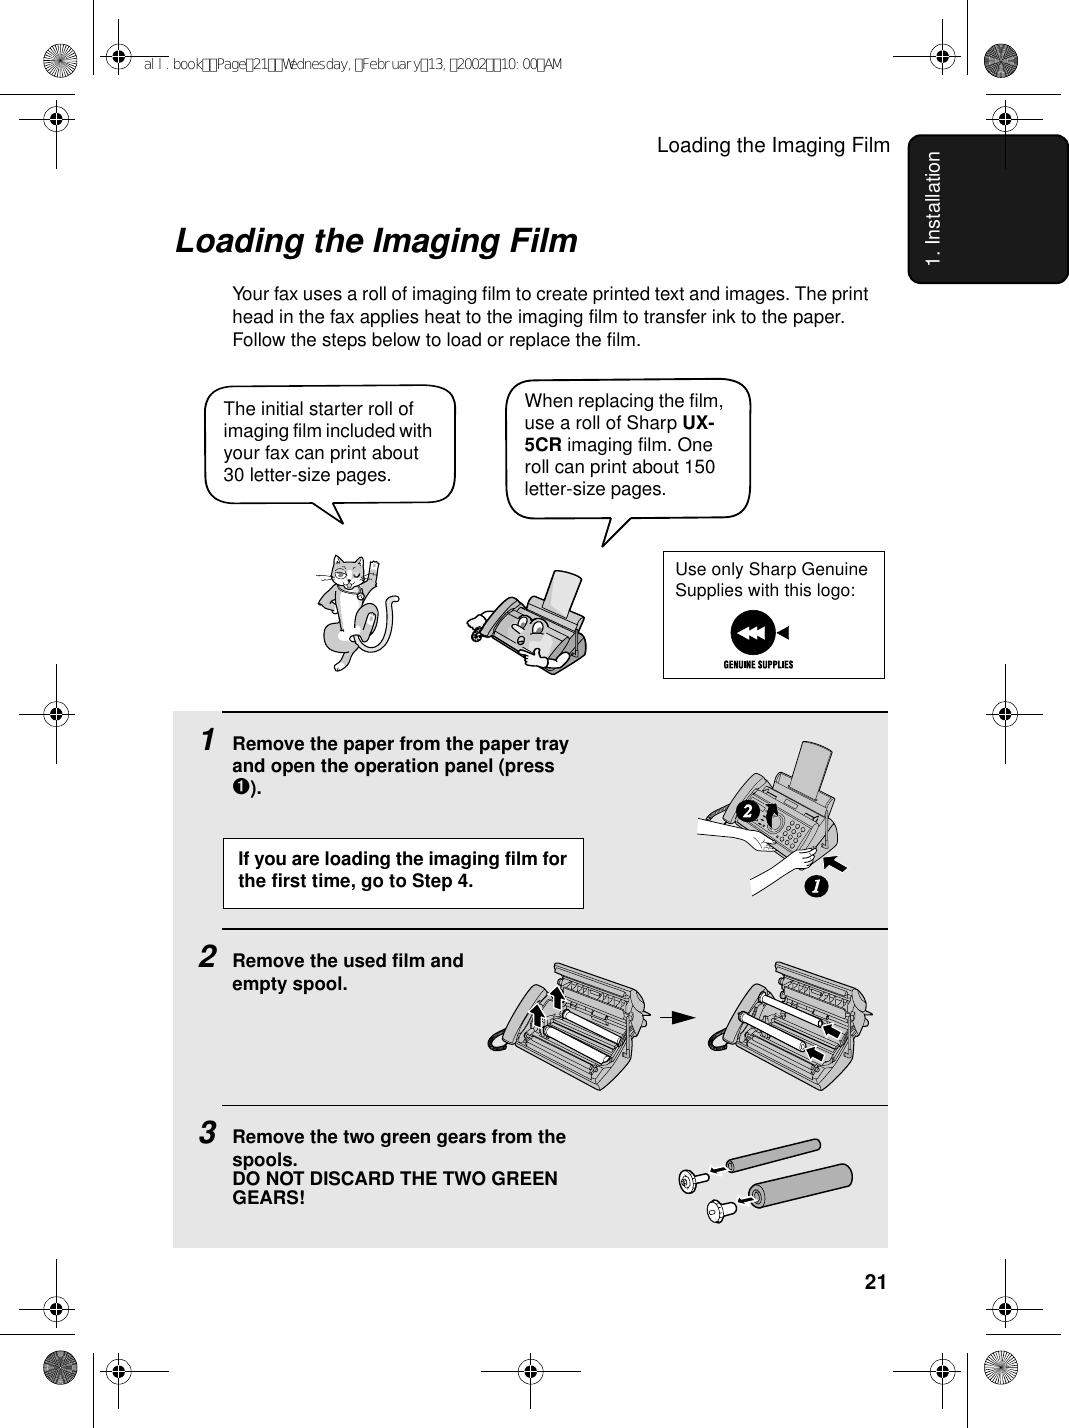 Loading the Imaging Film211. InstallationLoading the Imaging FilmYour fax uses a roll of imaging film to create printed text and images. The print head in the fax applies heat to the imaging film to transfer ink to the paper. Follow the steps below to load or replace the film.1Remove the paper from the paper tray and open the operation panel (press ➊).2Remove the used film andempty spool.3Remove the two green gears from the spools. DO NOT DISCARD THE TWO GREEN GEARS!12When replacing the film, use a roll of Sharp UX-5CR imaging film. One roll can print about 150 letter-size pages.The initial starter roll of imaging film included with your fax can print about 30 letter-size pages. If you are loading the imaging film for the first time, go to Step 4.Use only Sharp Genuine Supplies with this logo:all.bookPage21Wednesday,February13,200210:00AM